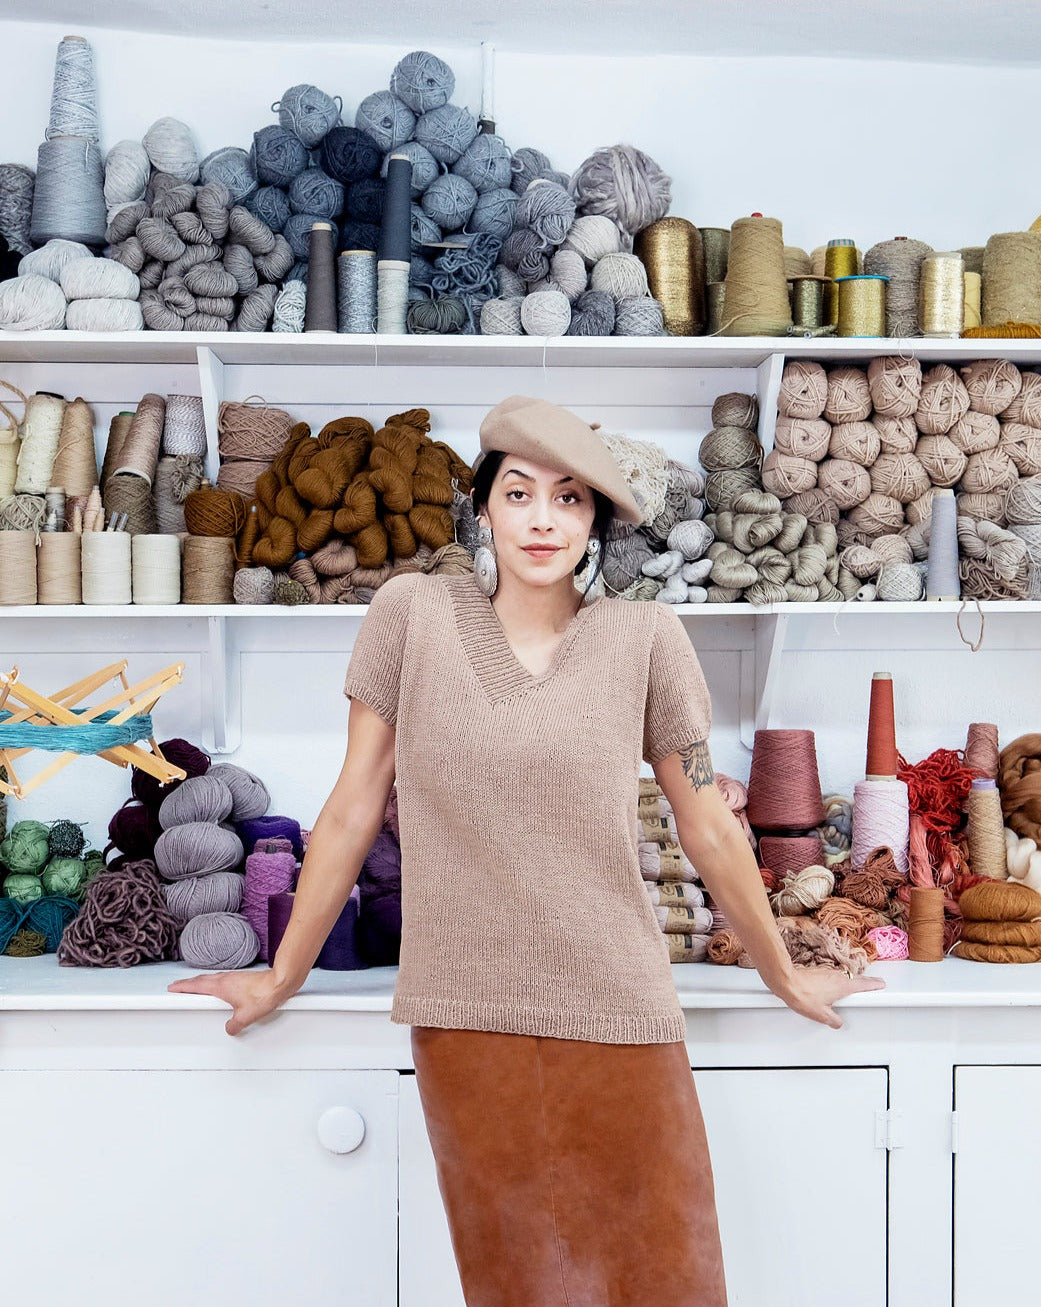 Have you any wool T shirts, As seen in Vogue Knitting magazine! - Firefly  Notes